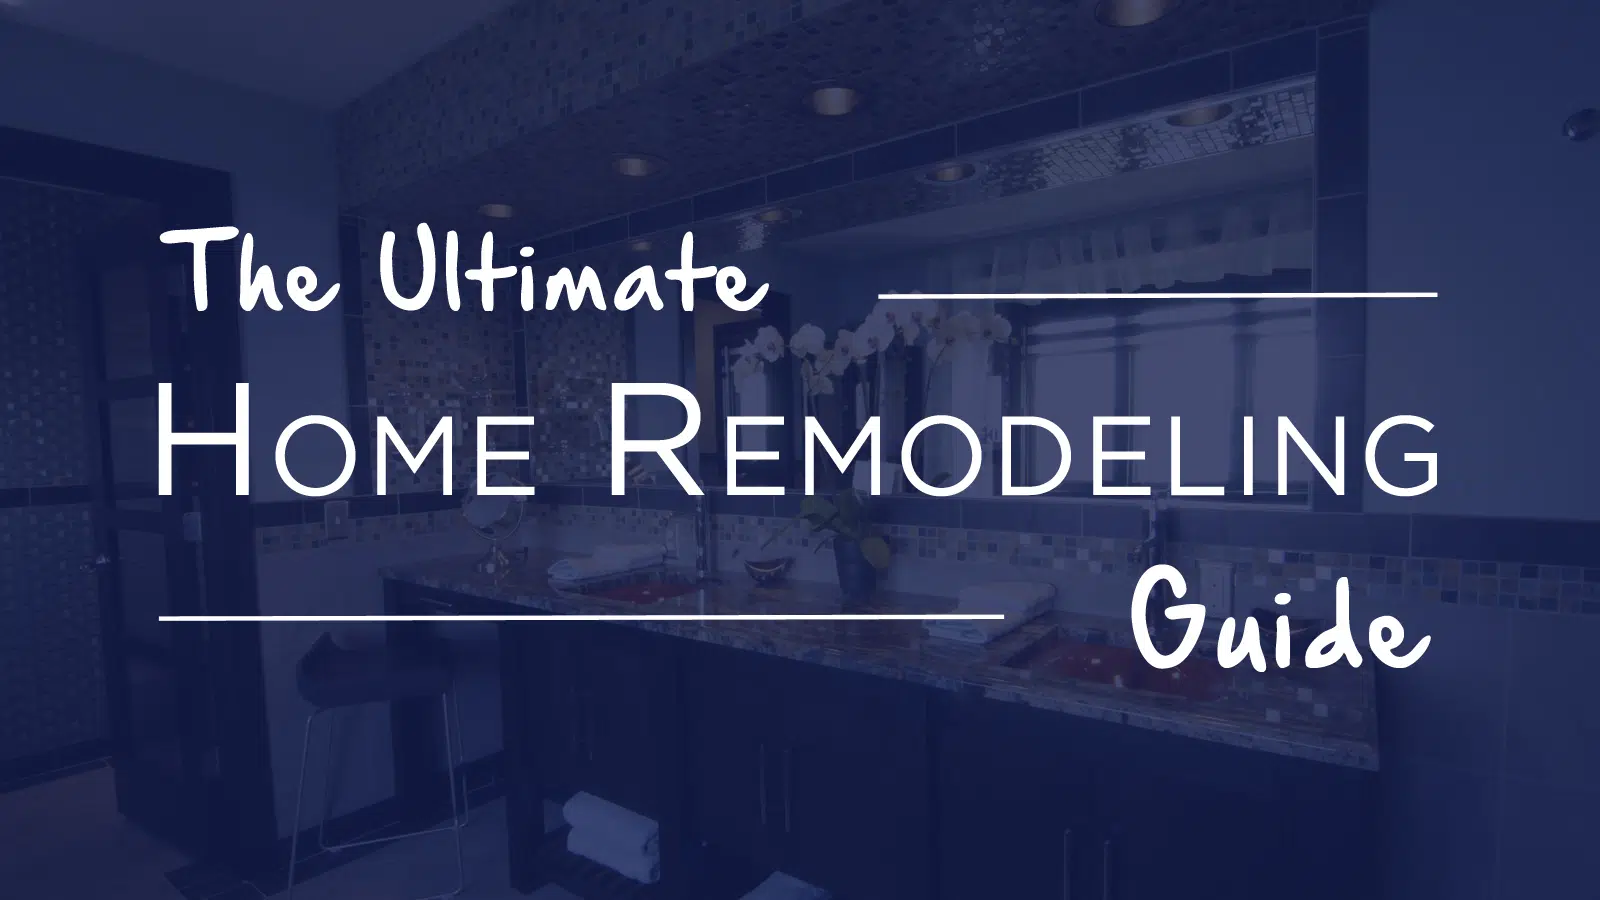 The Ultimate Remodeling Guide